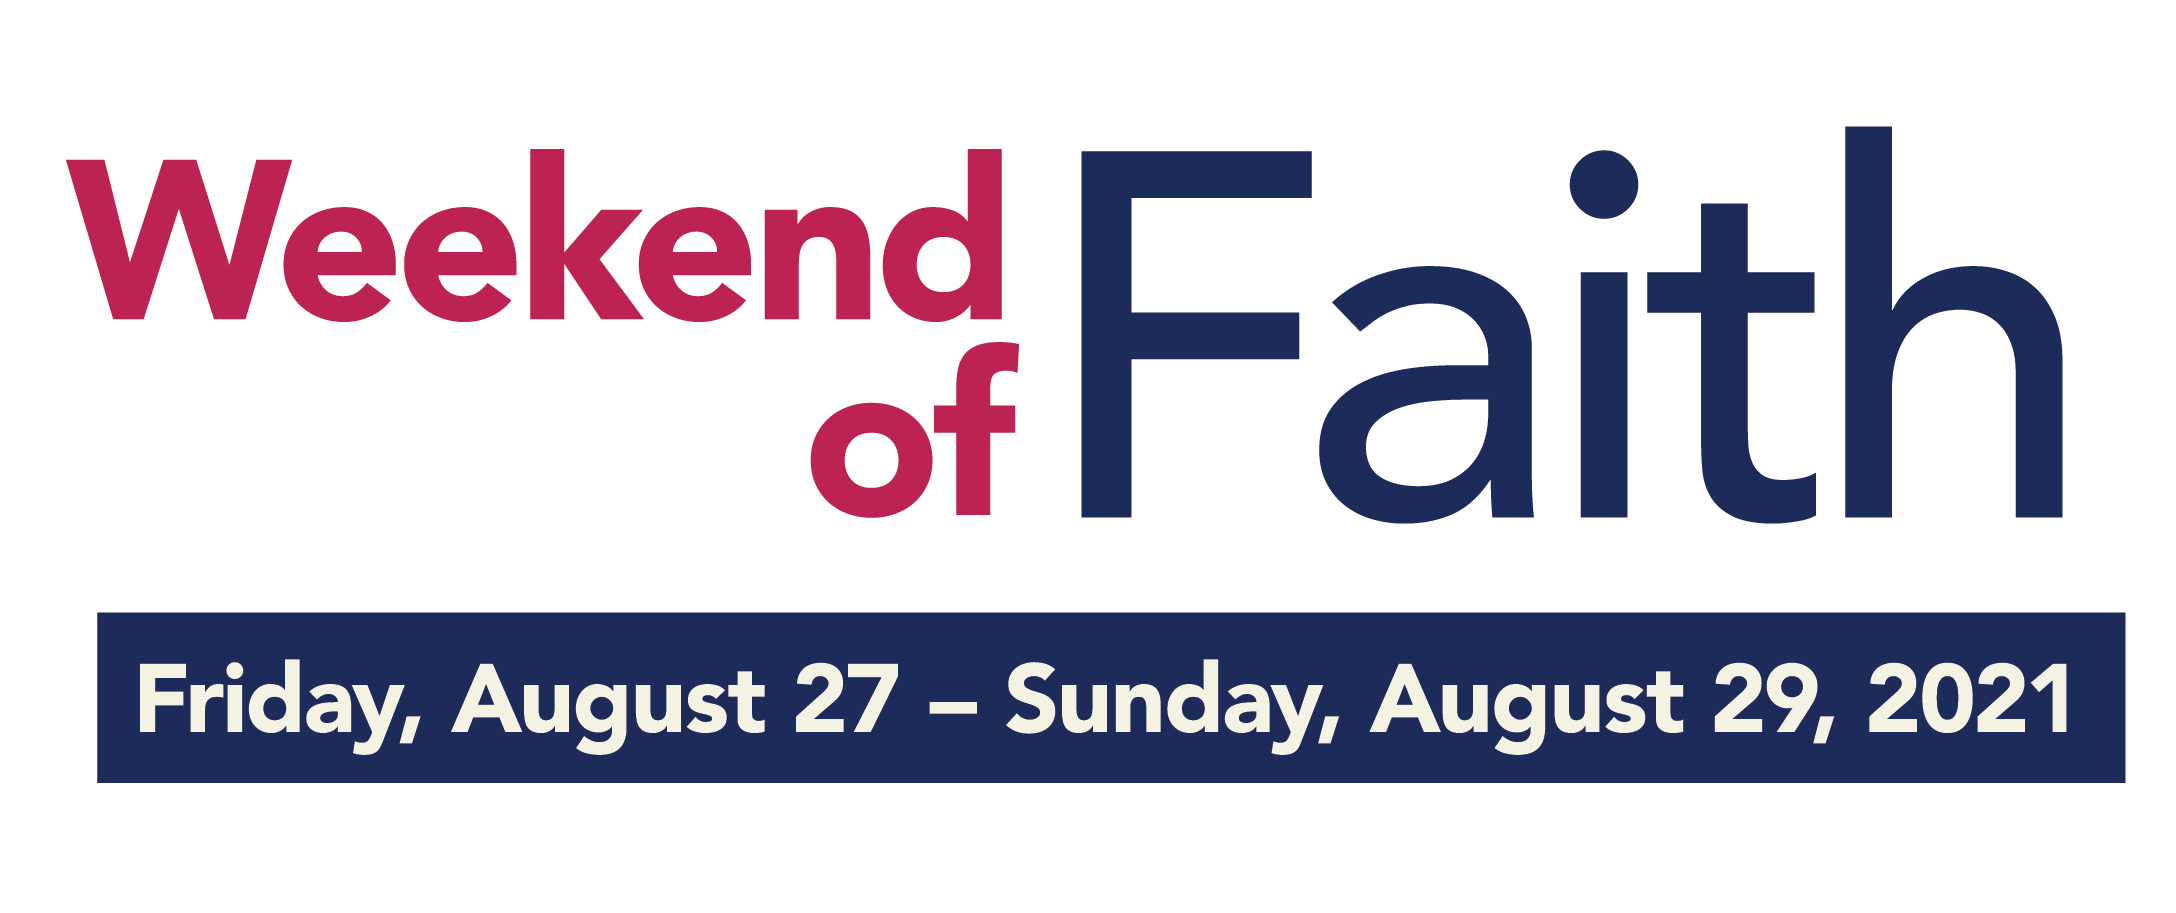 Weekend of Faith - Friday, August 27 to Sunday, August 29, 2021